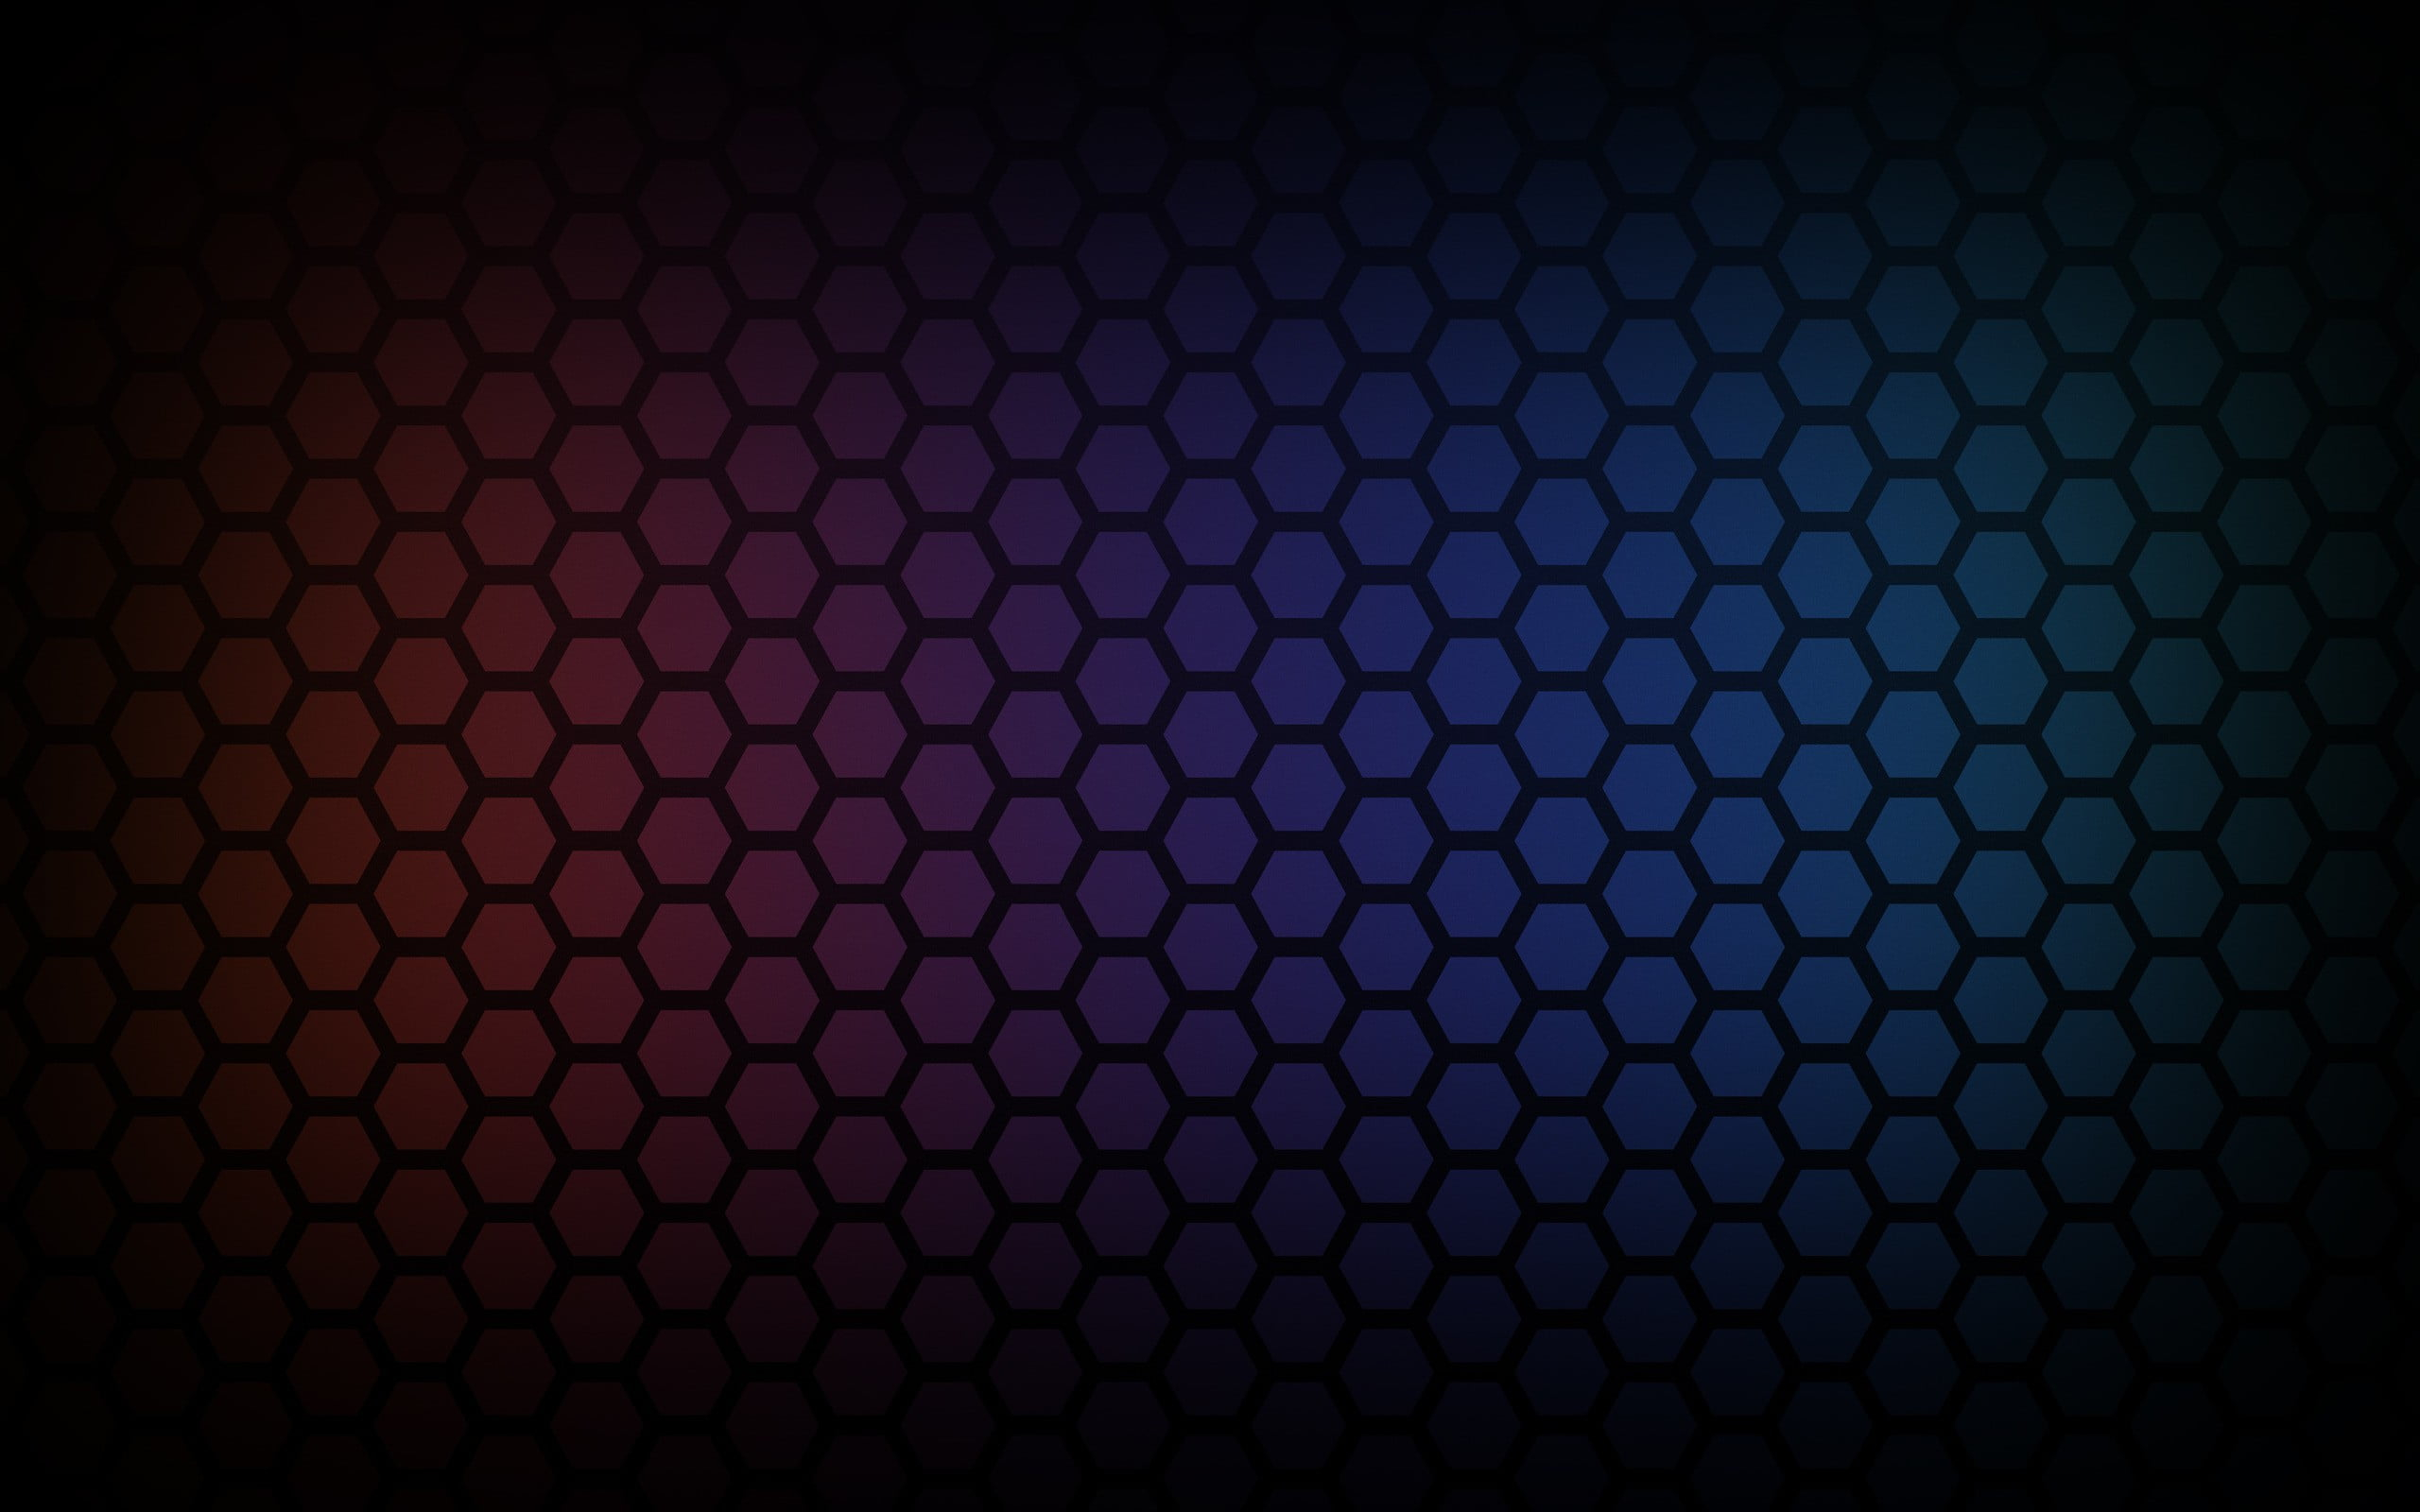 Black honeycomb graphic wallpaper, hexagon, colorful, pattern